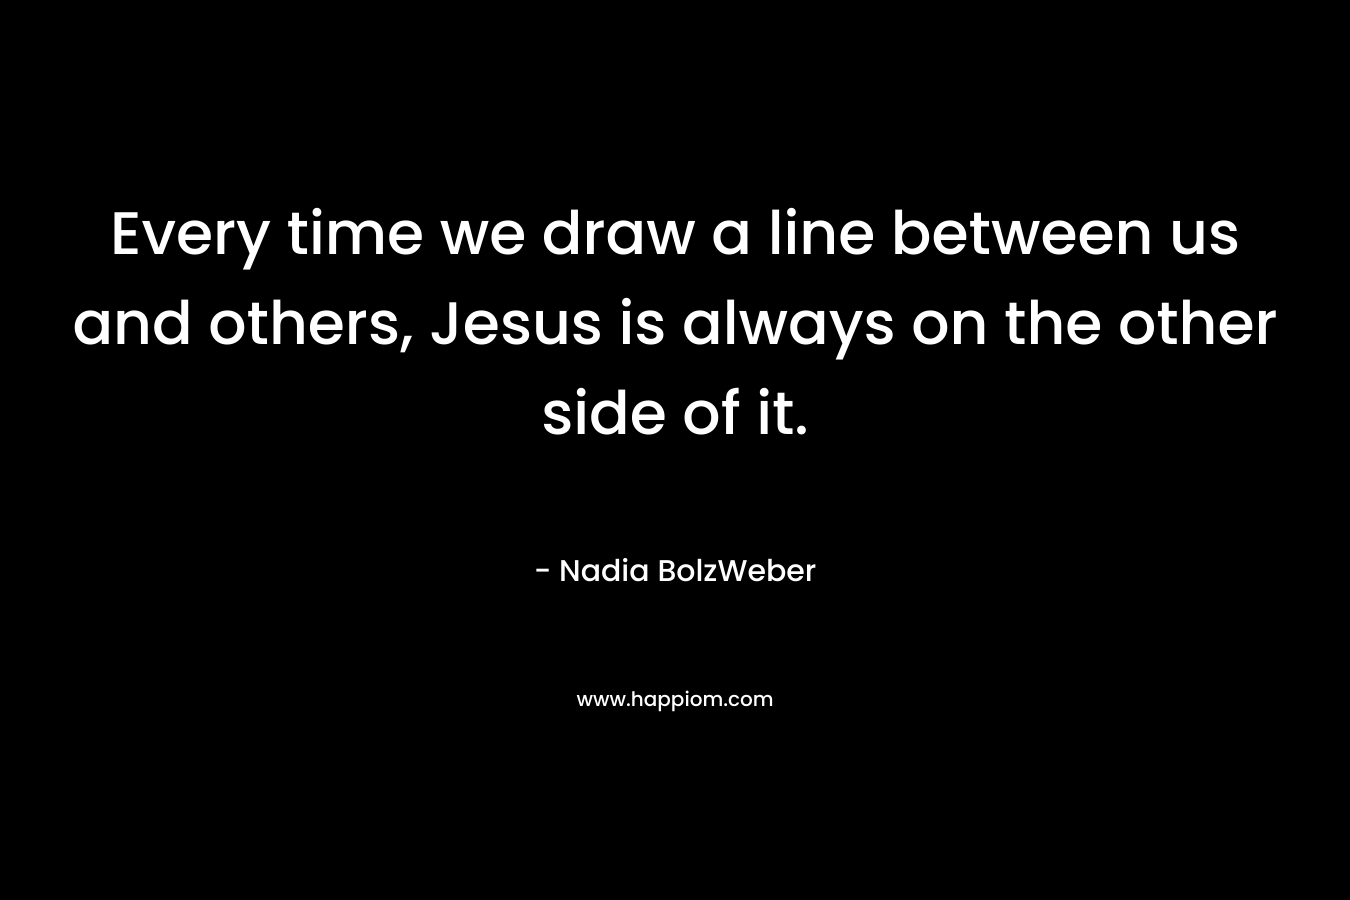 Every time we draw a line between us and others, Jesus is always on the other side of it.